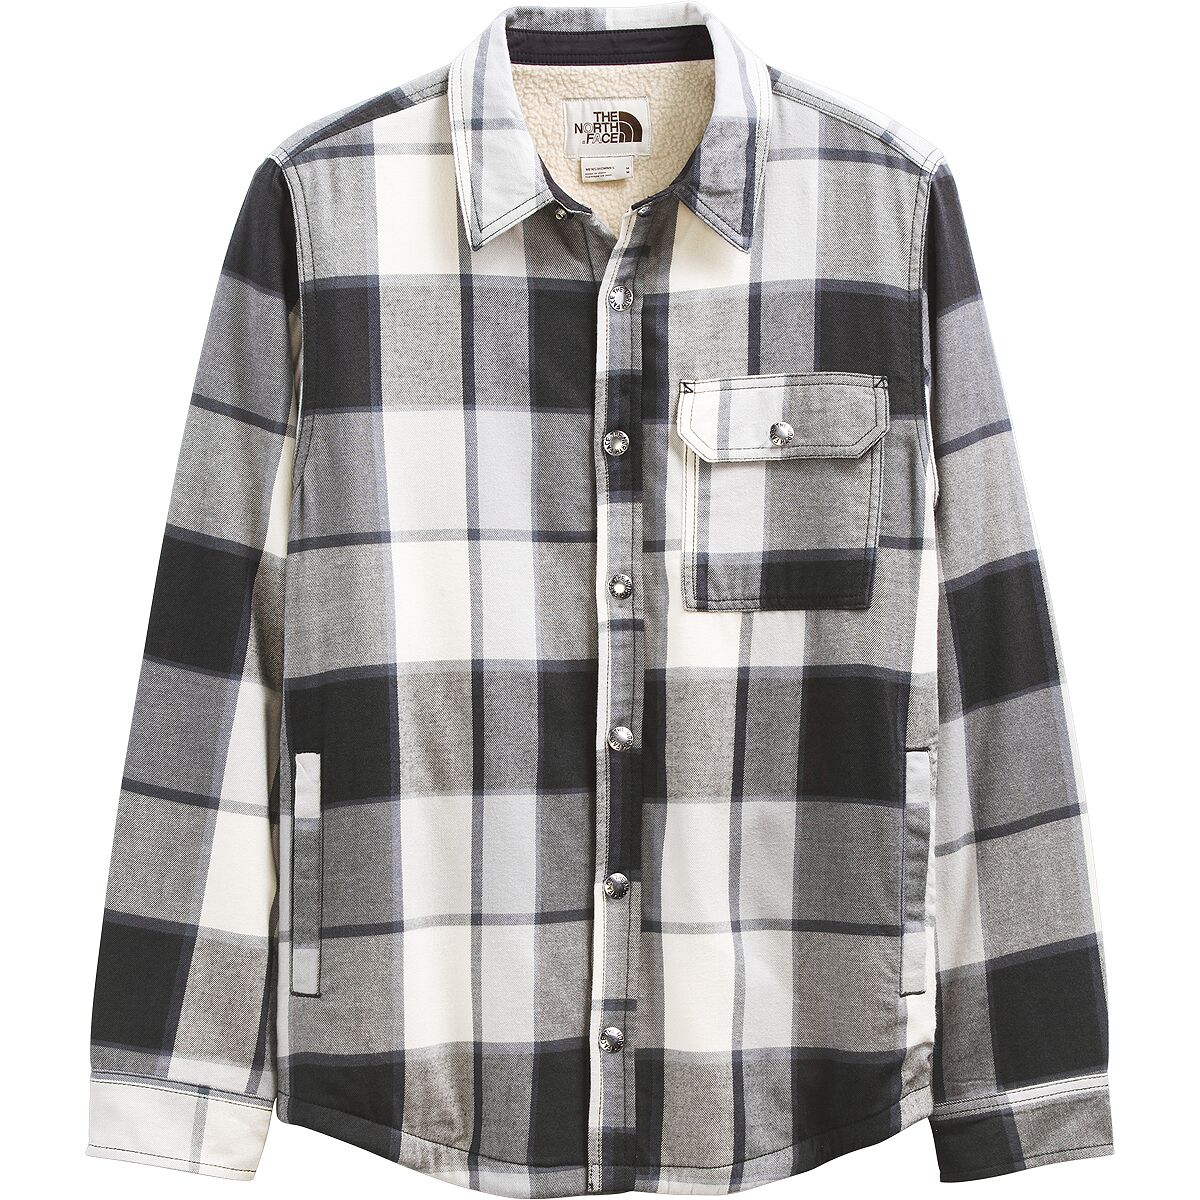 The North Face Campshire Shirt - Men's - Clothing